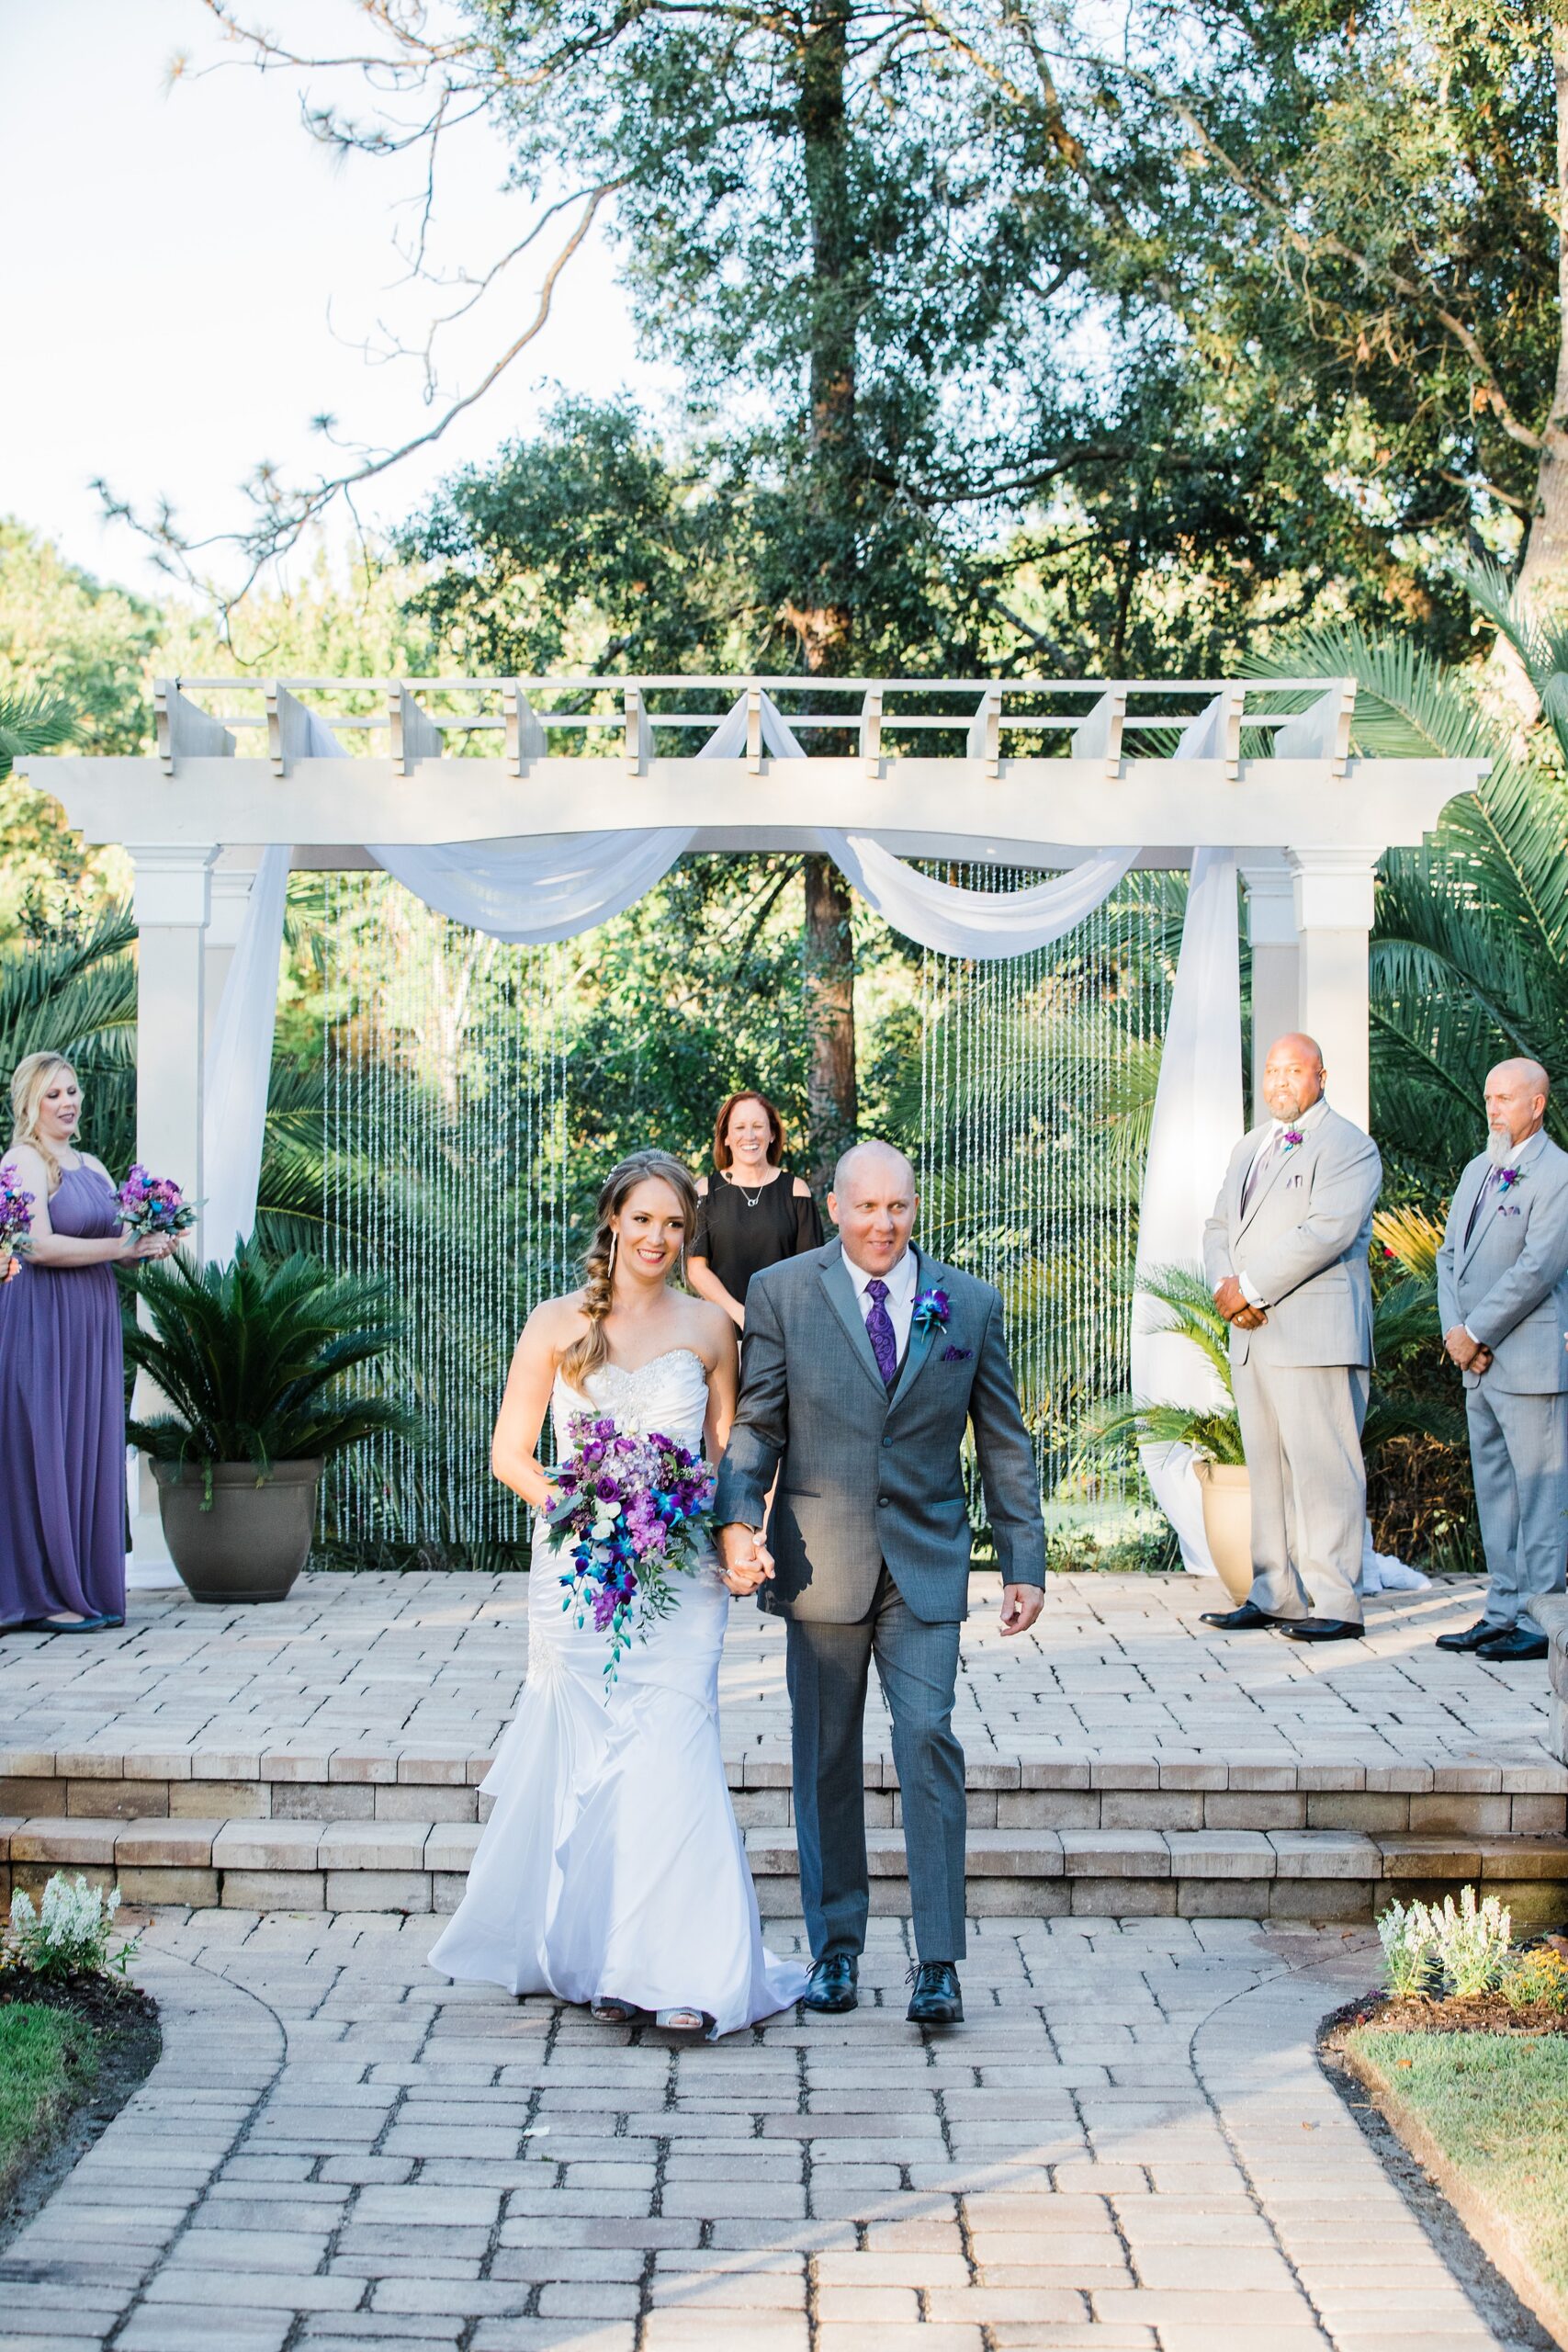 Newlyweds walk up the aisle holding hands at the end of their outdoor magnolia point wedding ceremony